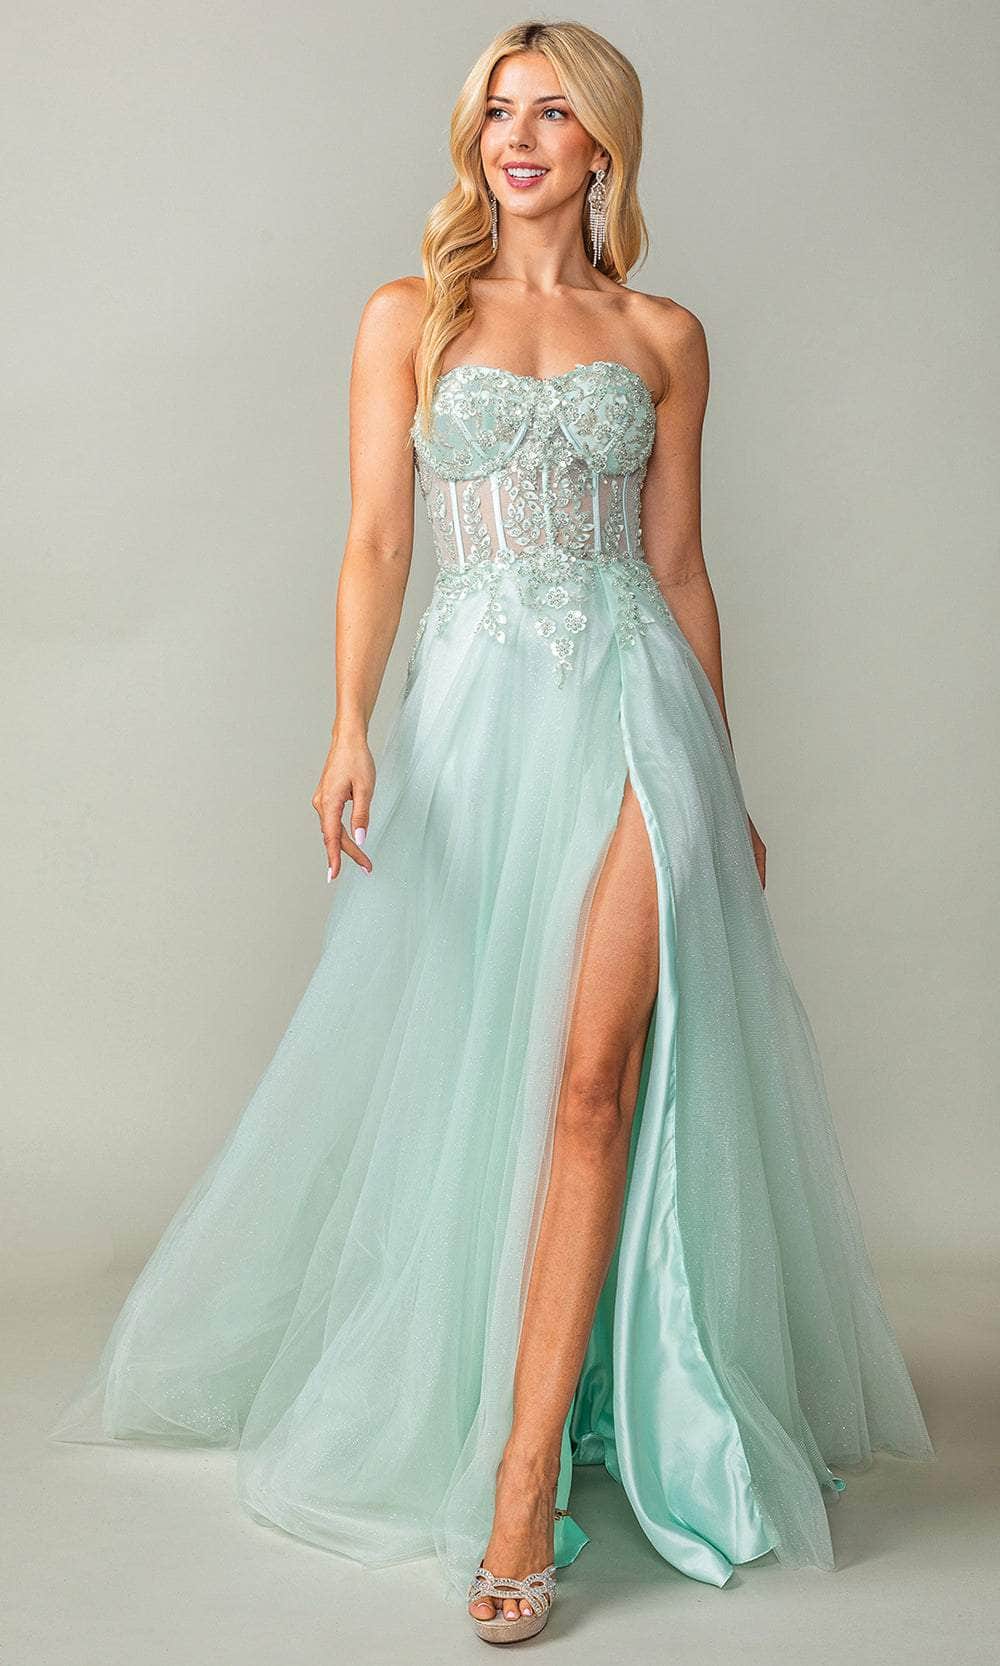 Image of Dancing Queen 4406 - Strapless Embroidered Prom Gown